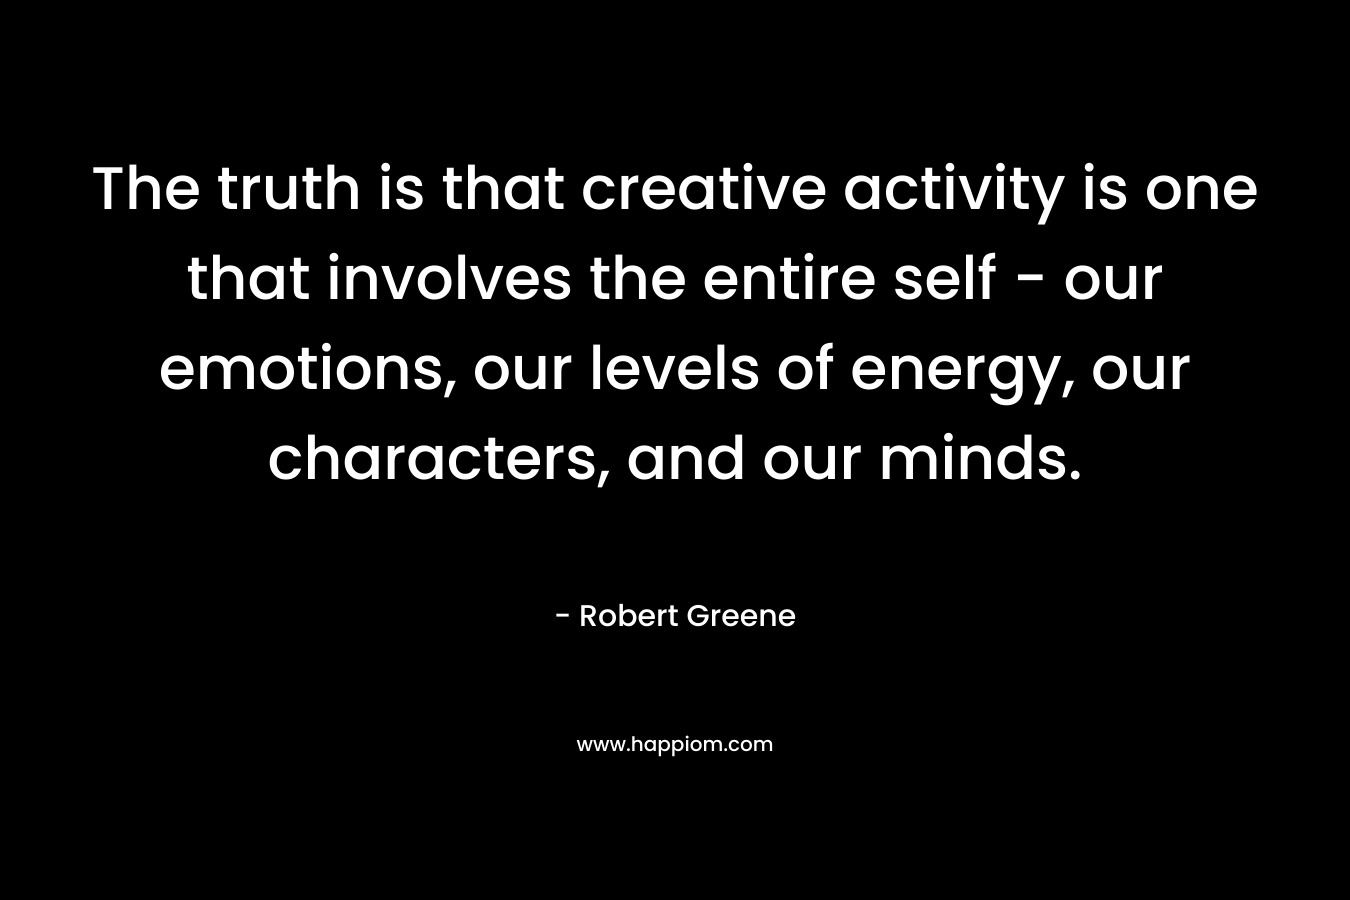 The truth is that creative activity is one that involves the entire self - our emotions, our levels of energy, our characters, and our minds.